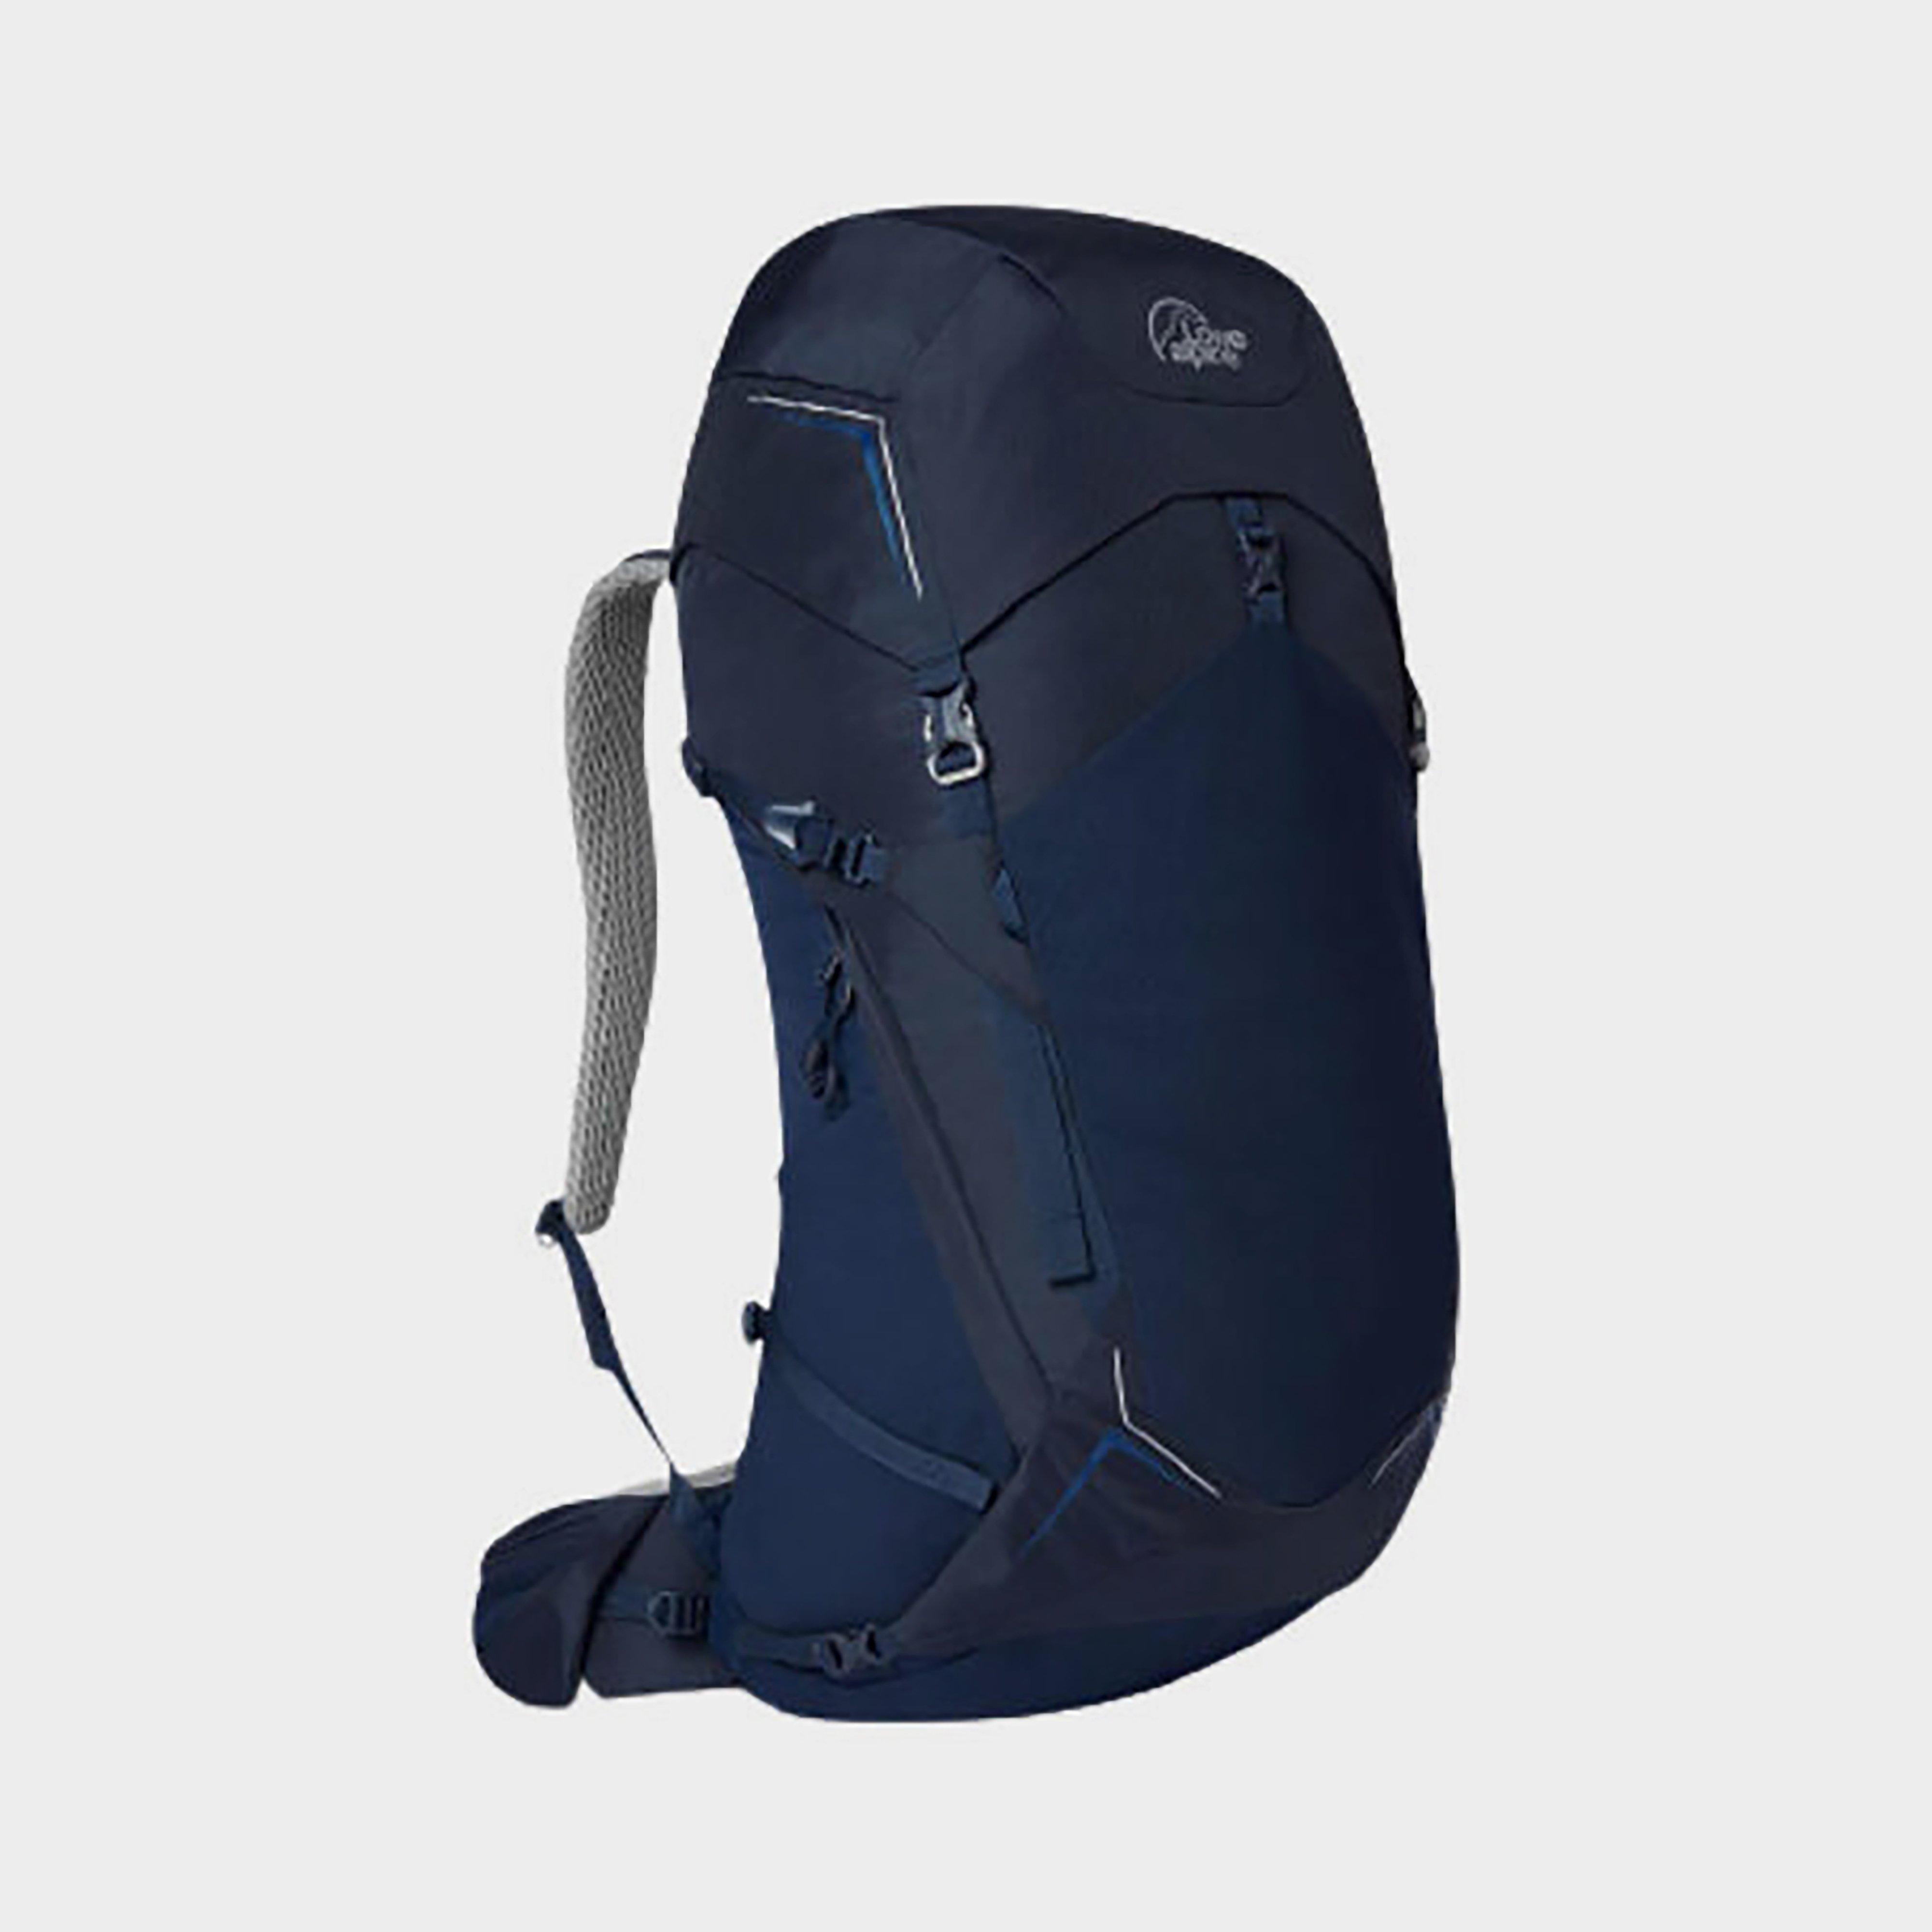 Lowe Alpine Airzone Trek 35:45l Backpack - Navy/nvy  Navy/nvy